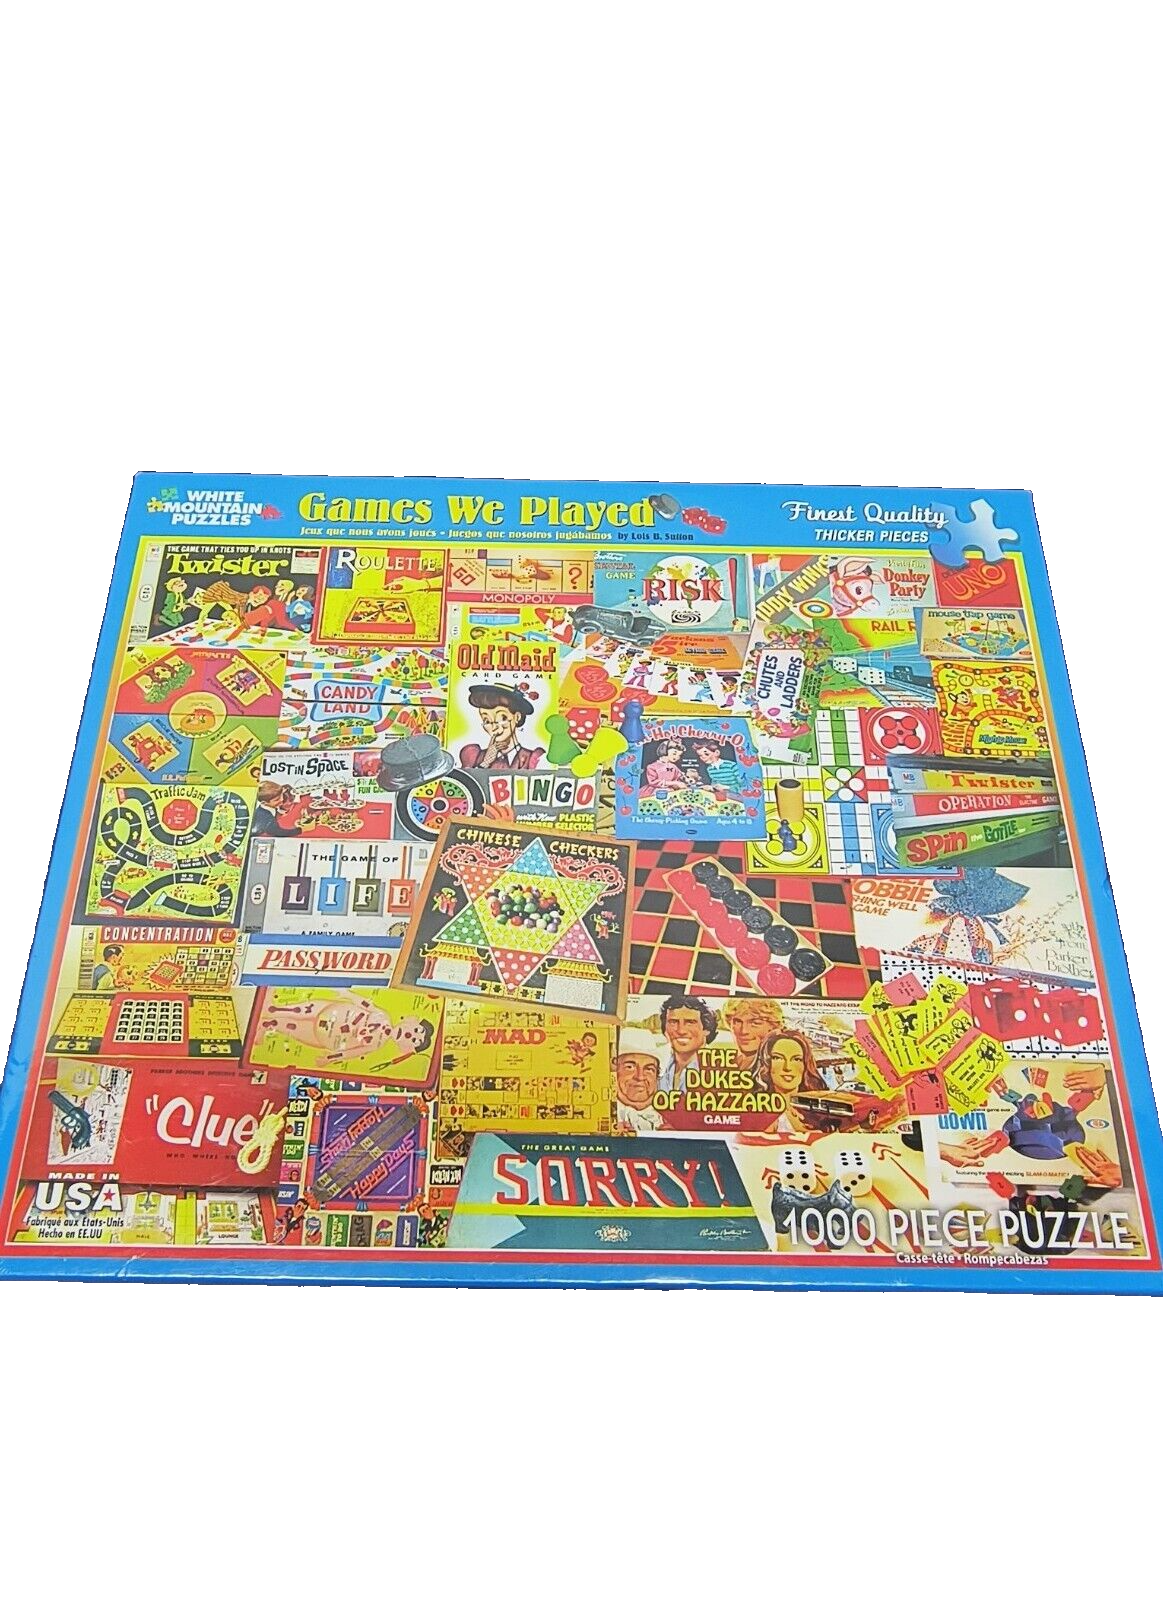 Puzzle Jigsaw White Mountain 1000 Pieces Jigsaw Puzzle -  Games We Played - $10.99